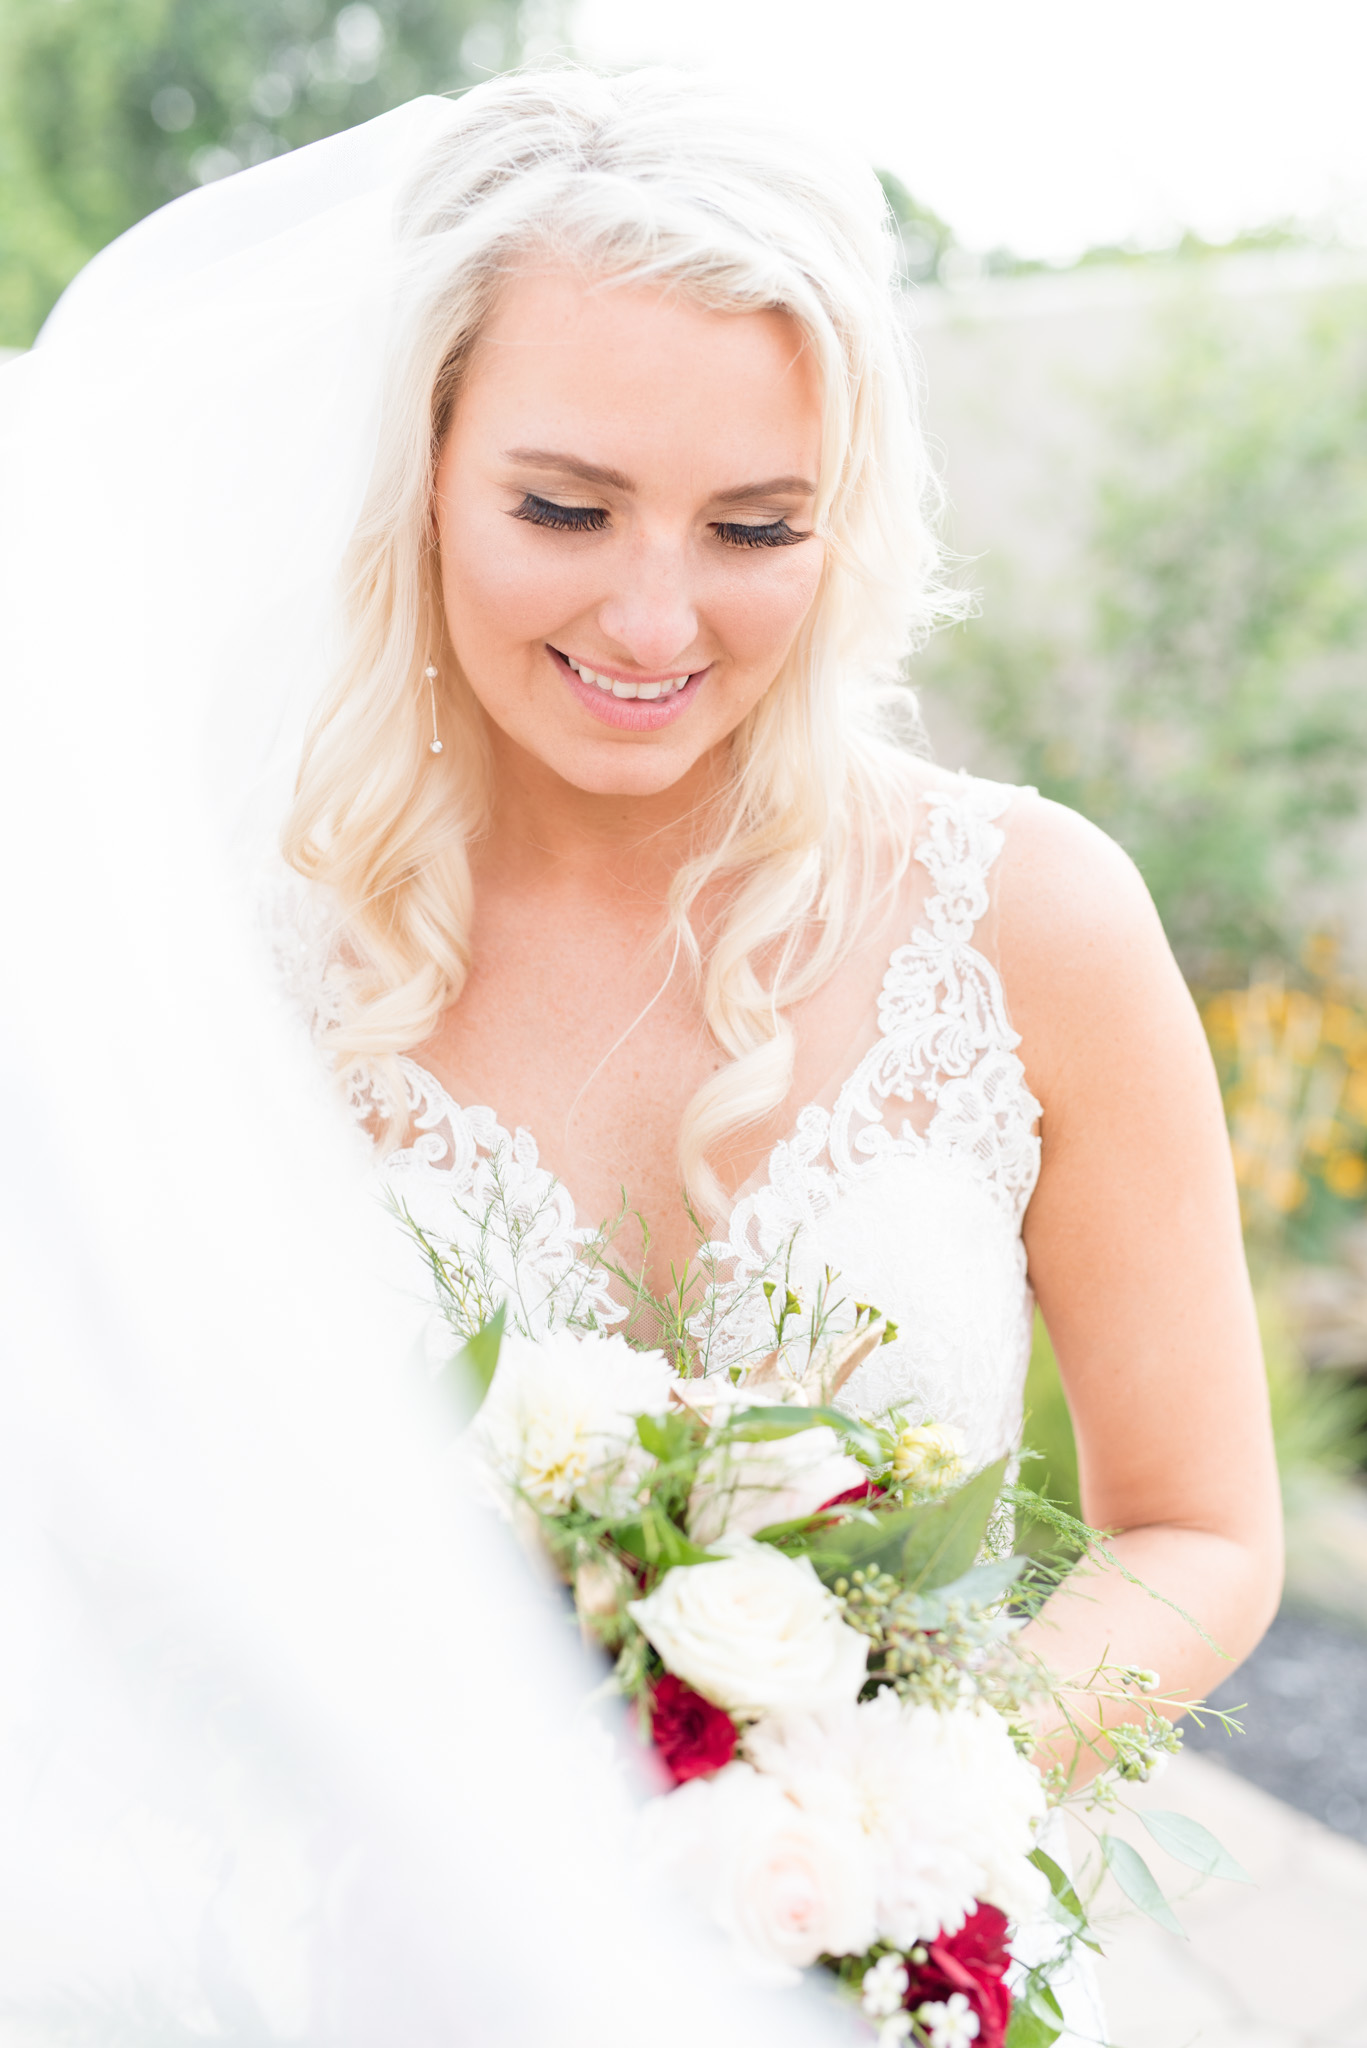 Bride looks down at bouquet and smiles.